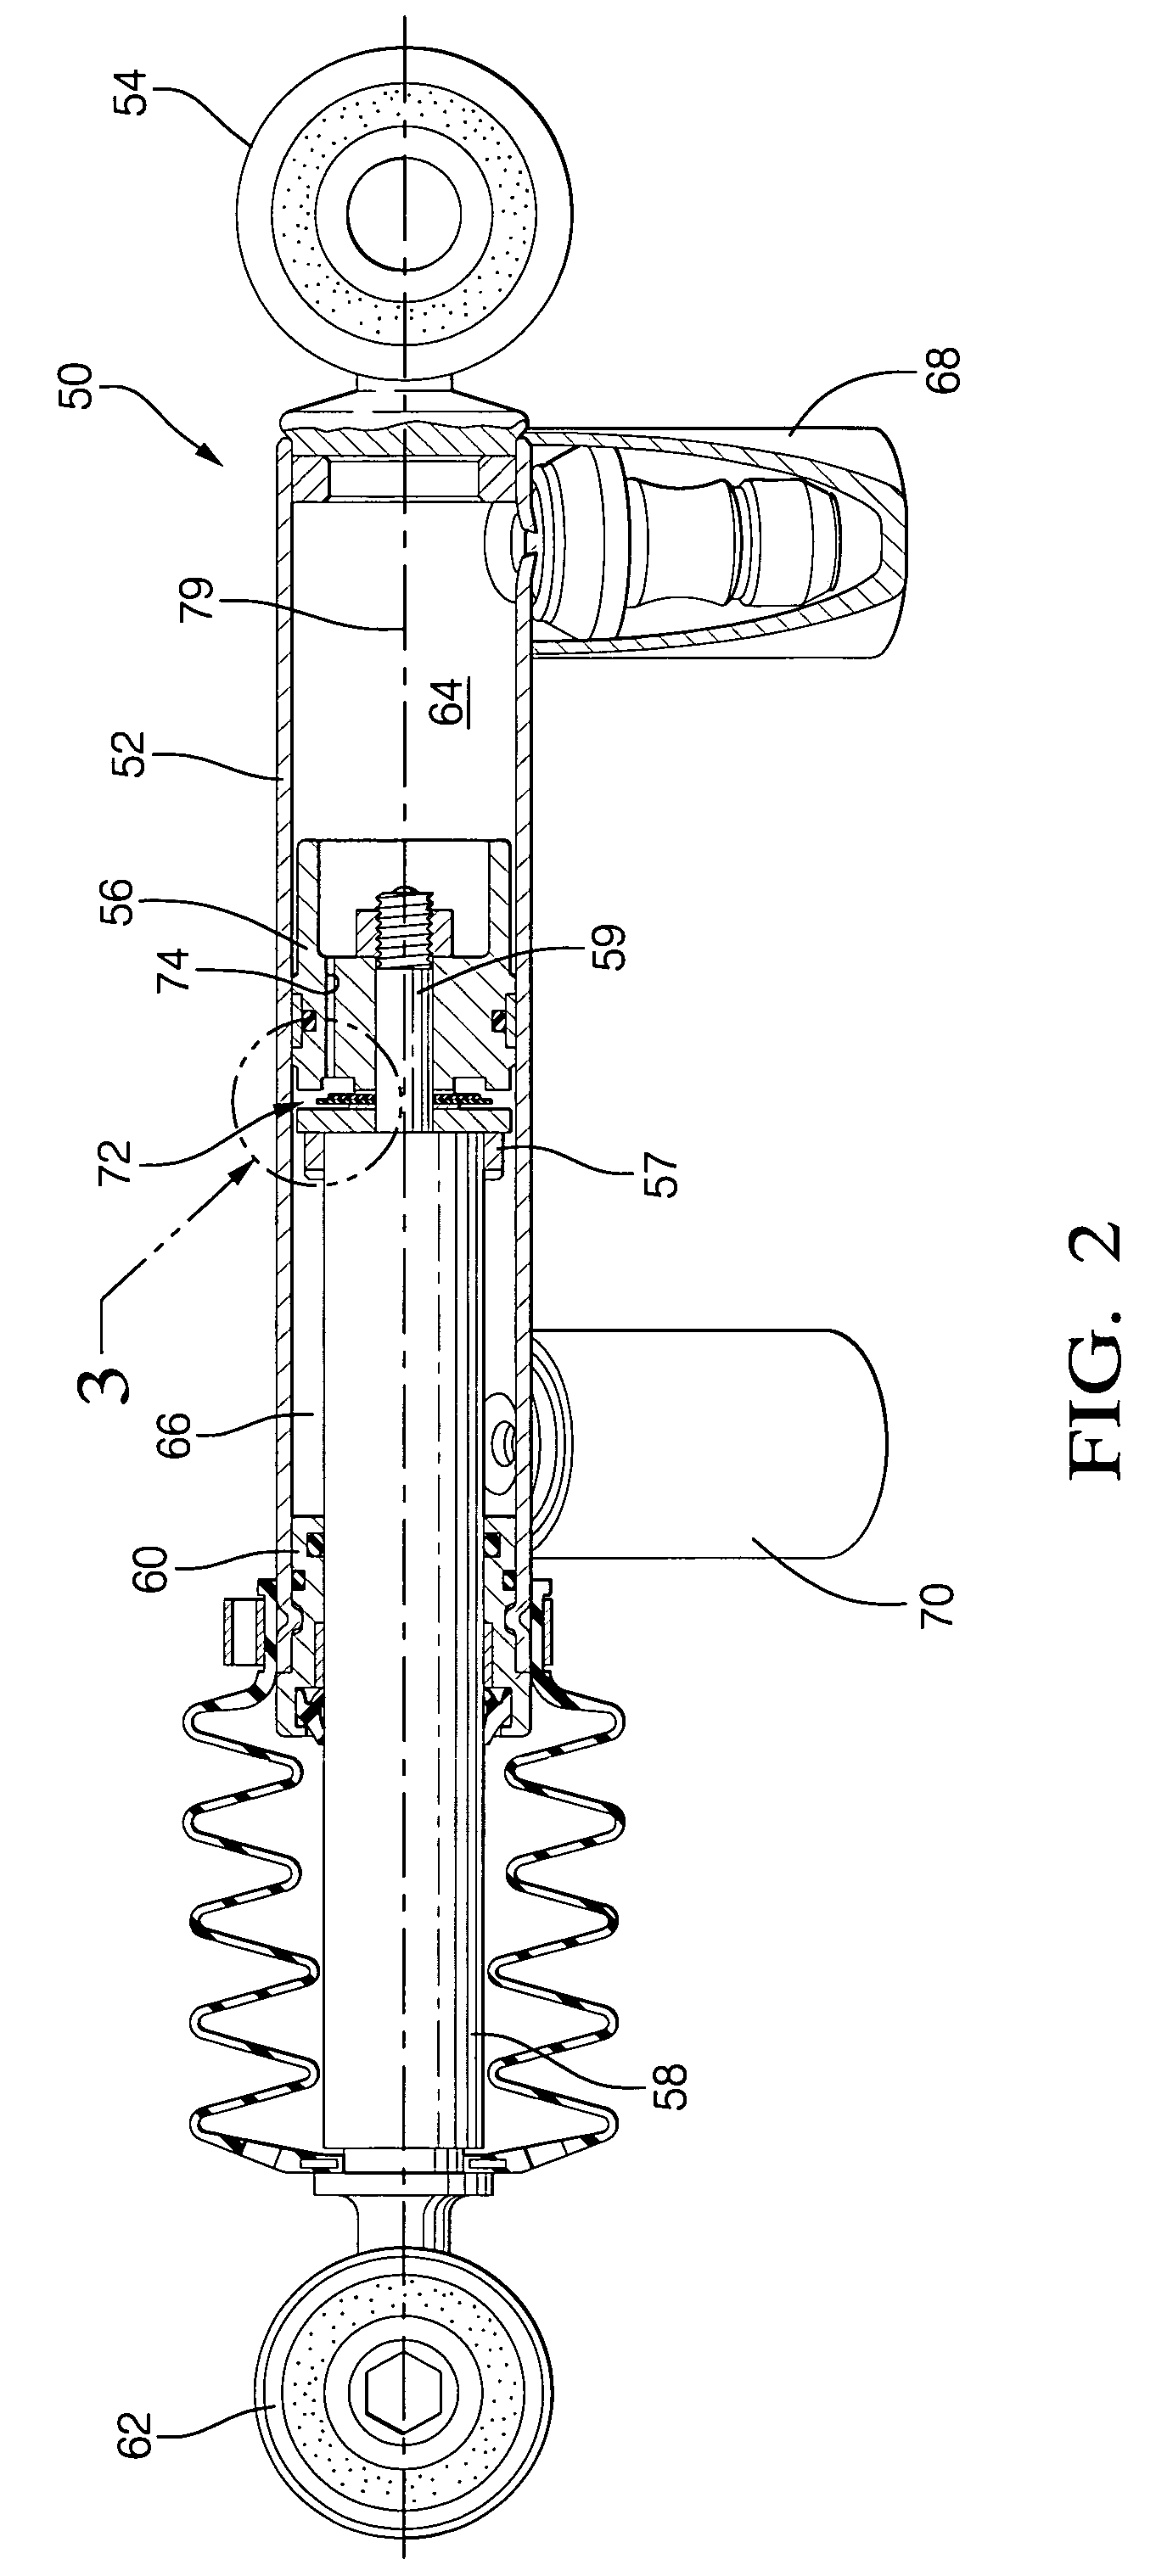 Hydraulic actuator having disc valve assembly